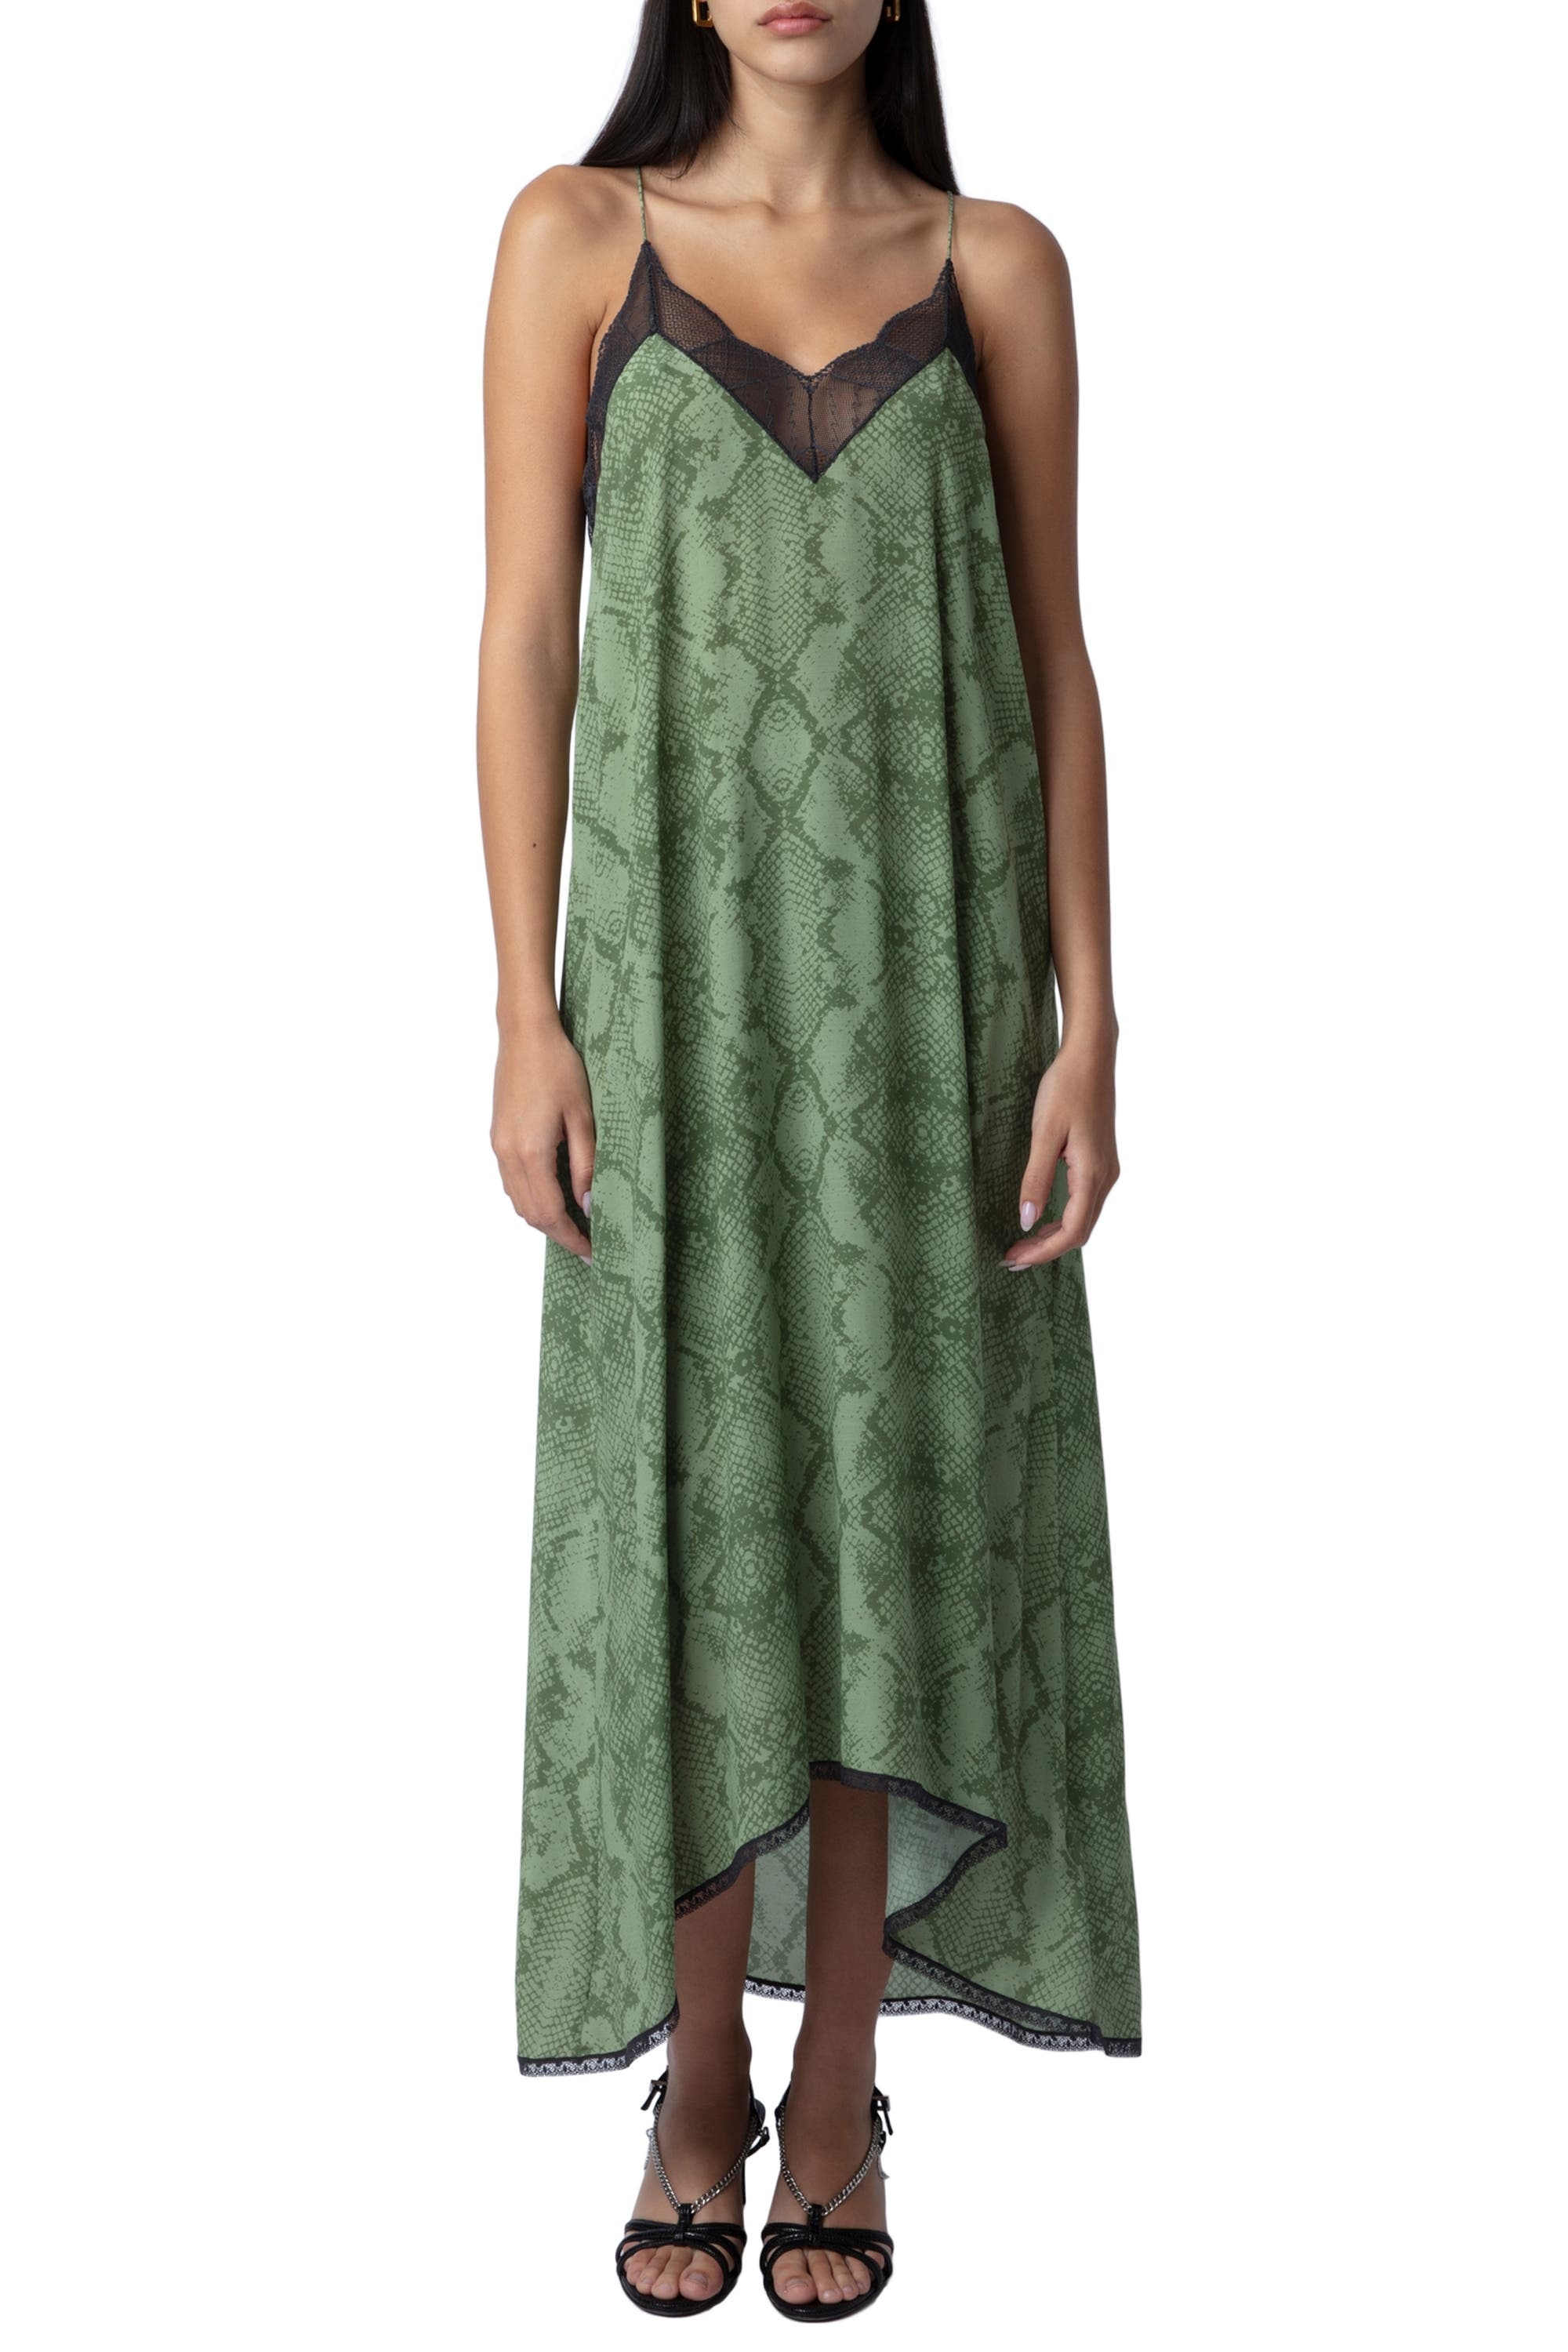 model in green subtle snake print slip maxi dress with black lace trim and a slight high-low hem cut